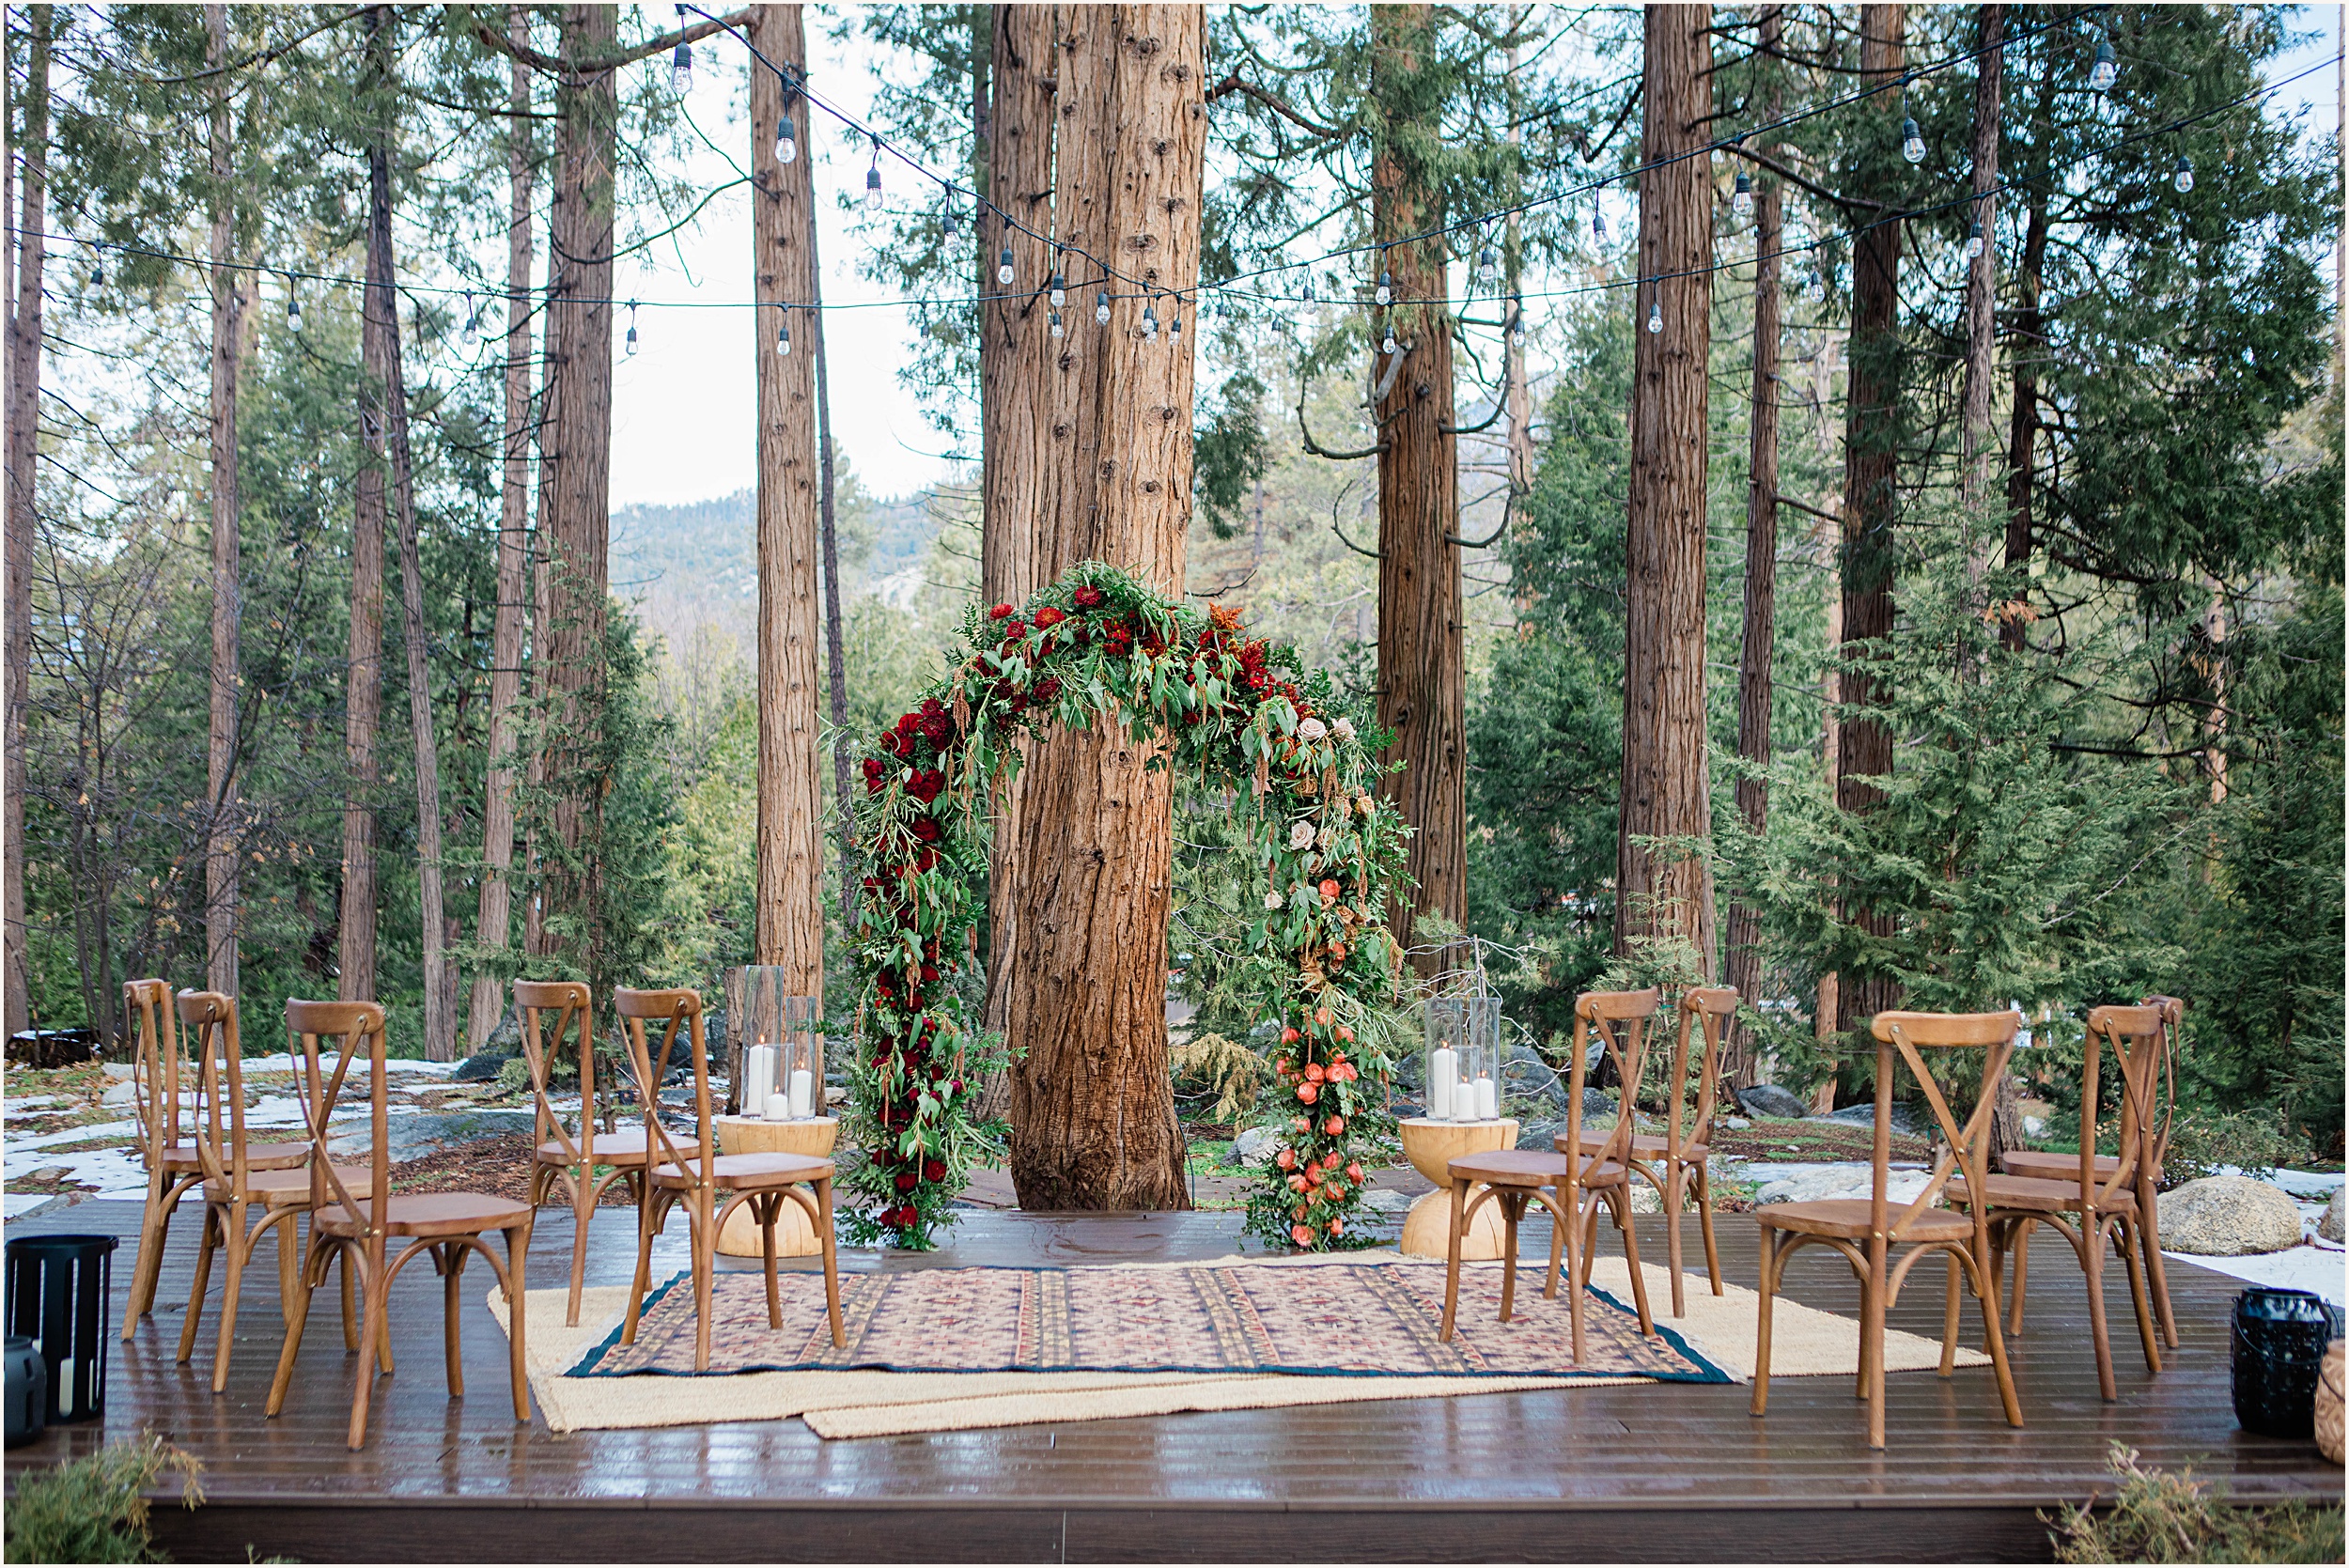 Harvey-House-Styled-Shoot_0022 How to Have a Mountain Elopement in Idyllwild California